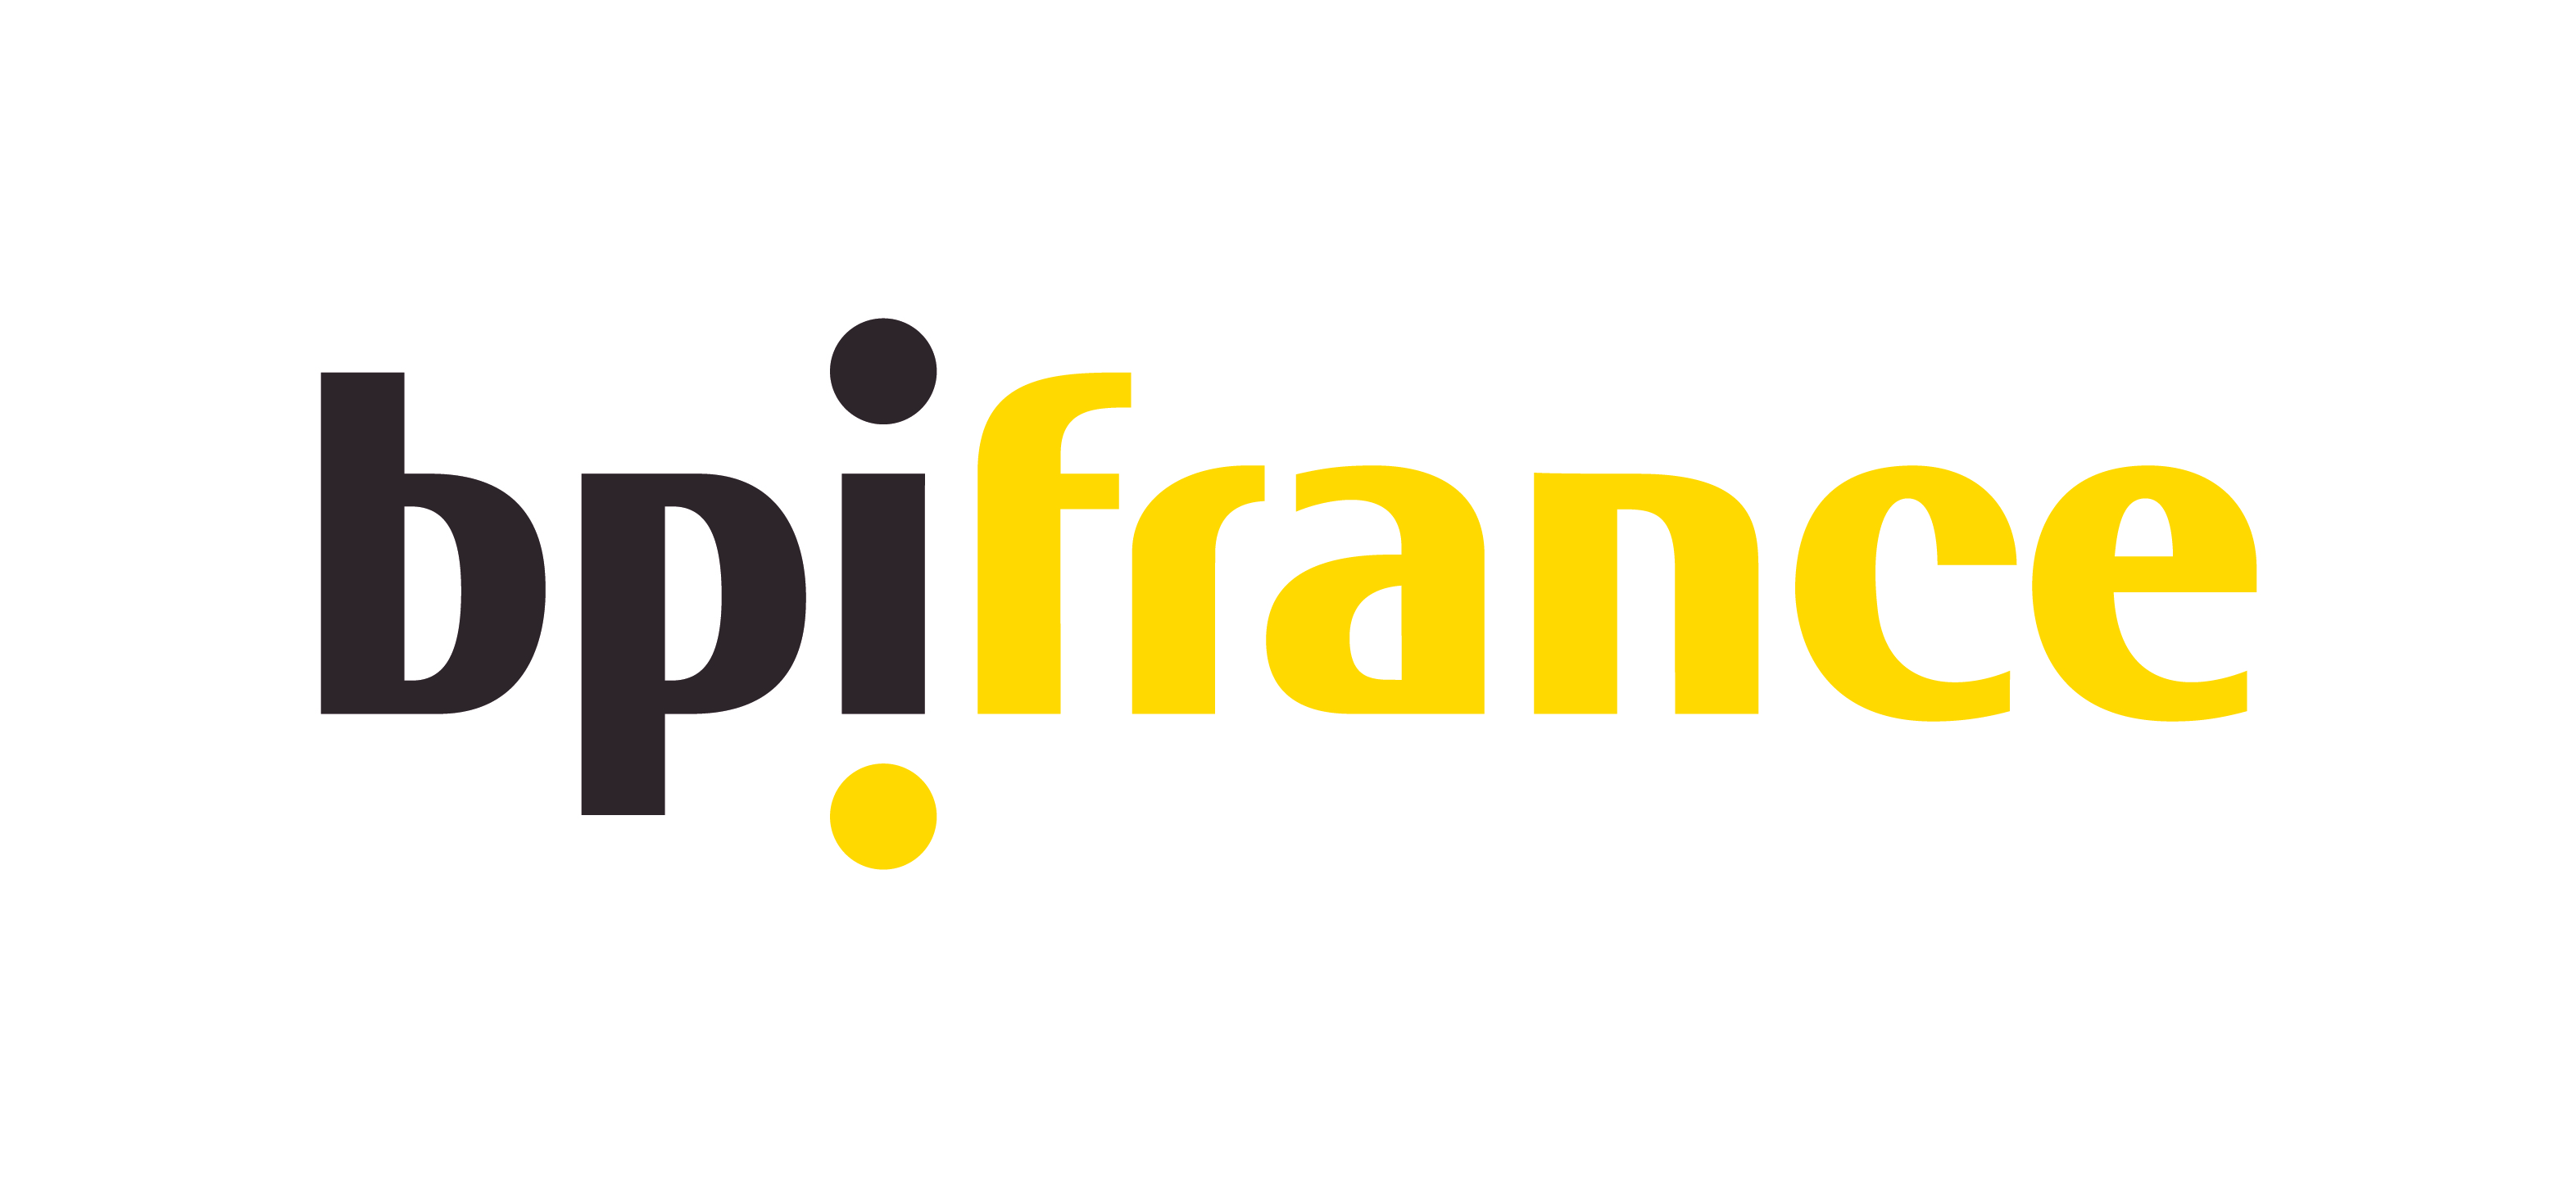 Image result for BPifrance